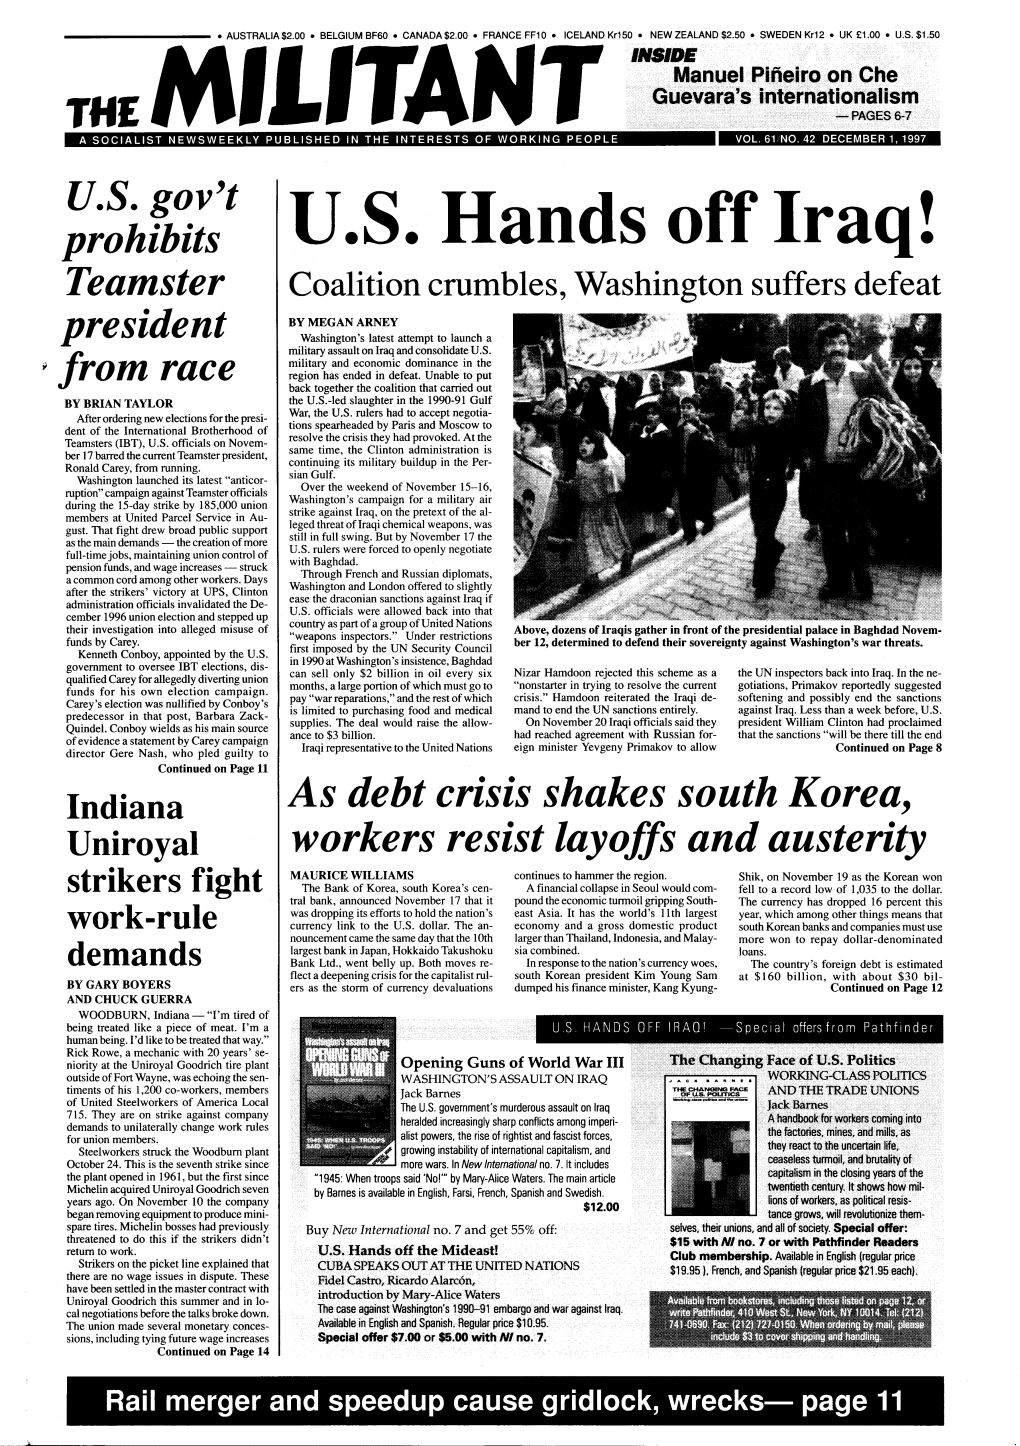 U.S. Hands Off Iraq! Teamster Coalition Crumbles, Washington Suffers Defeat